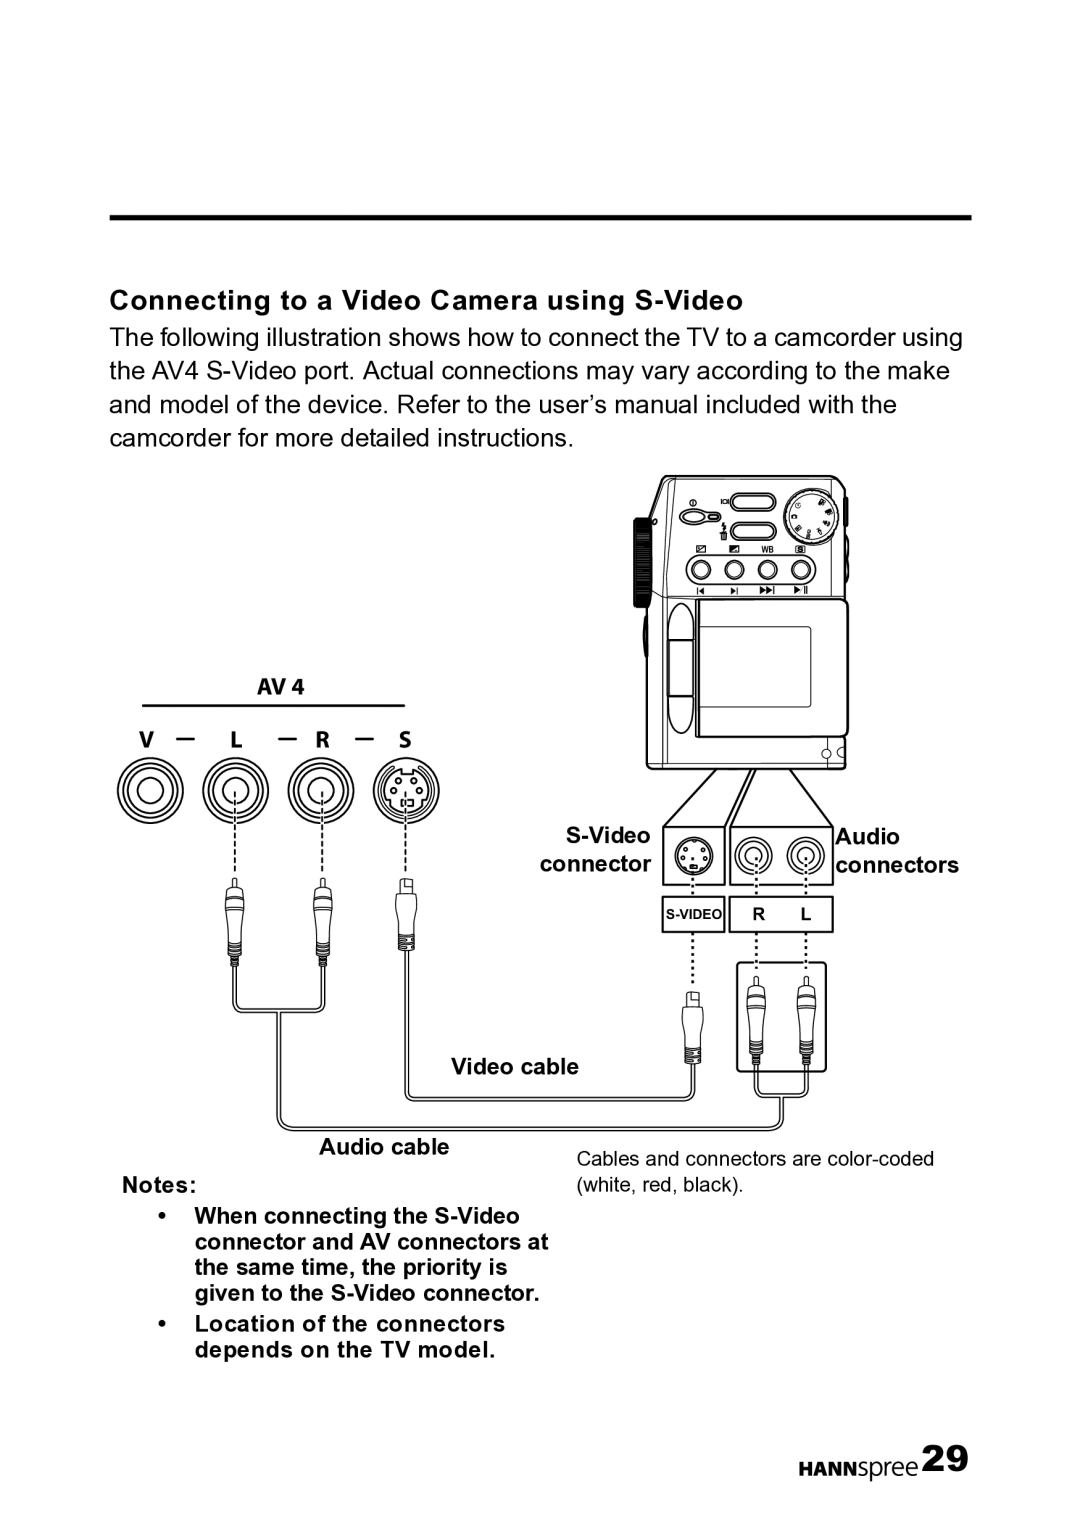 HANNspree LT12-23U1-000 user manual Connecting to a Video Camera using S-Video, R S 